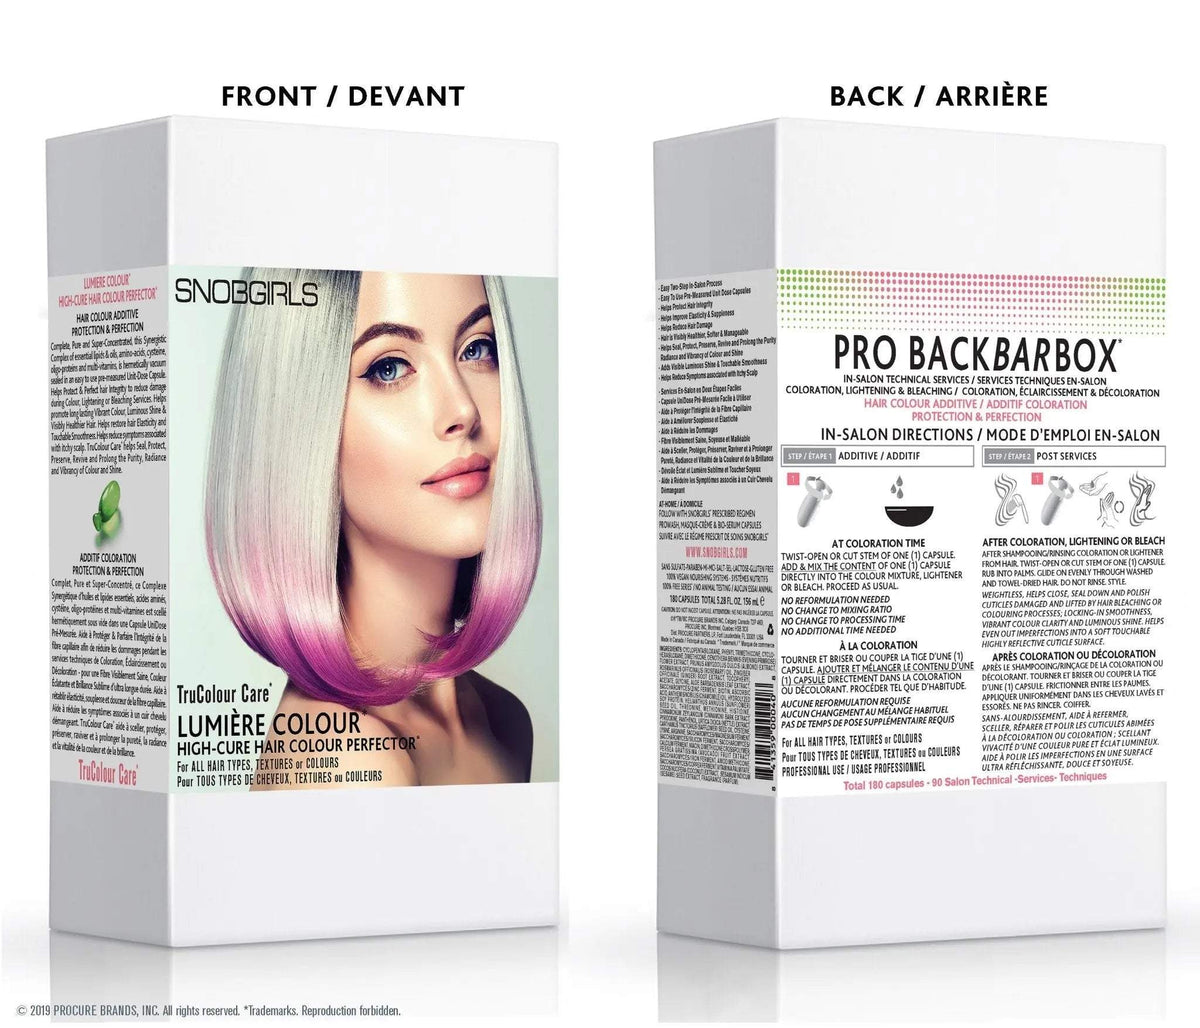 PRO BACKBARBOX HAIR COLOUR ADDITIVE PROTECTION &amp; PERFECTION - SNOBGIRLS Canada